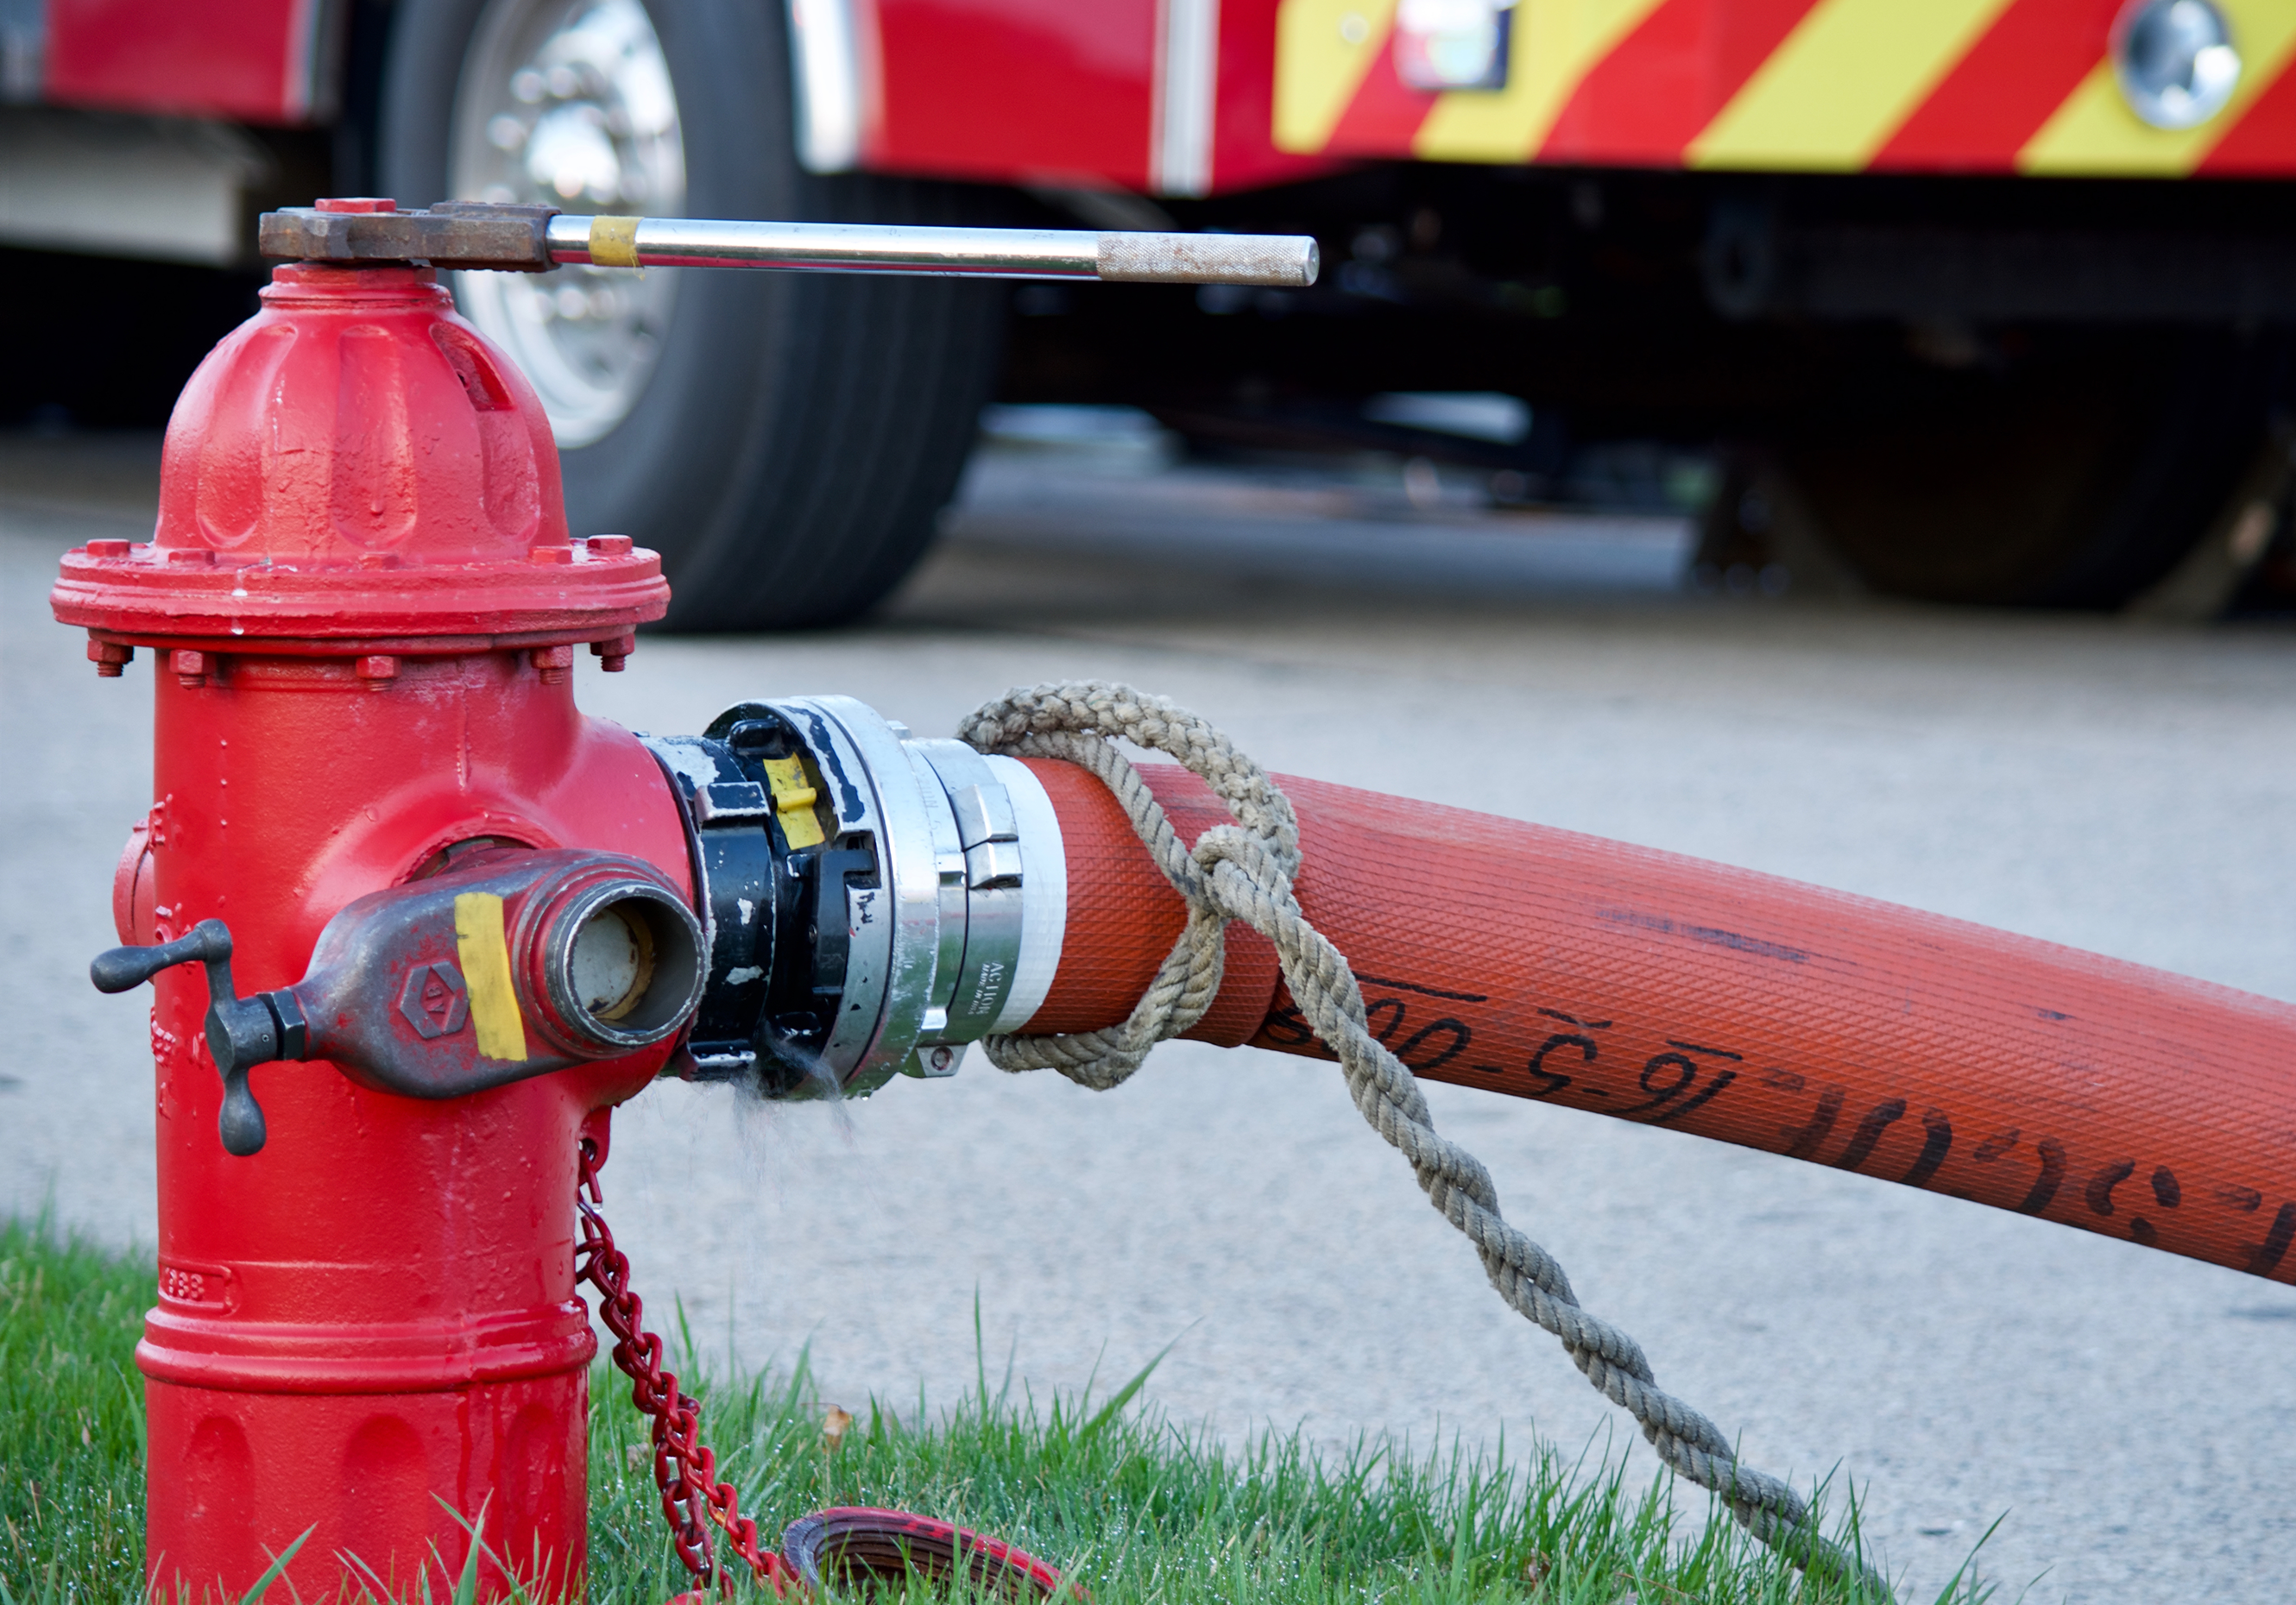 Reasons Why Facilities in Nigeria Should Install Fire Hydrant Systems from BASSCOMM